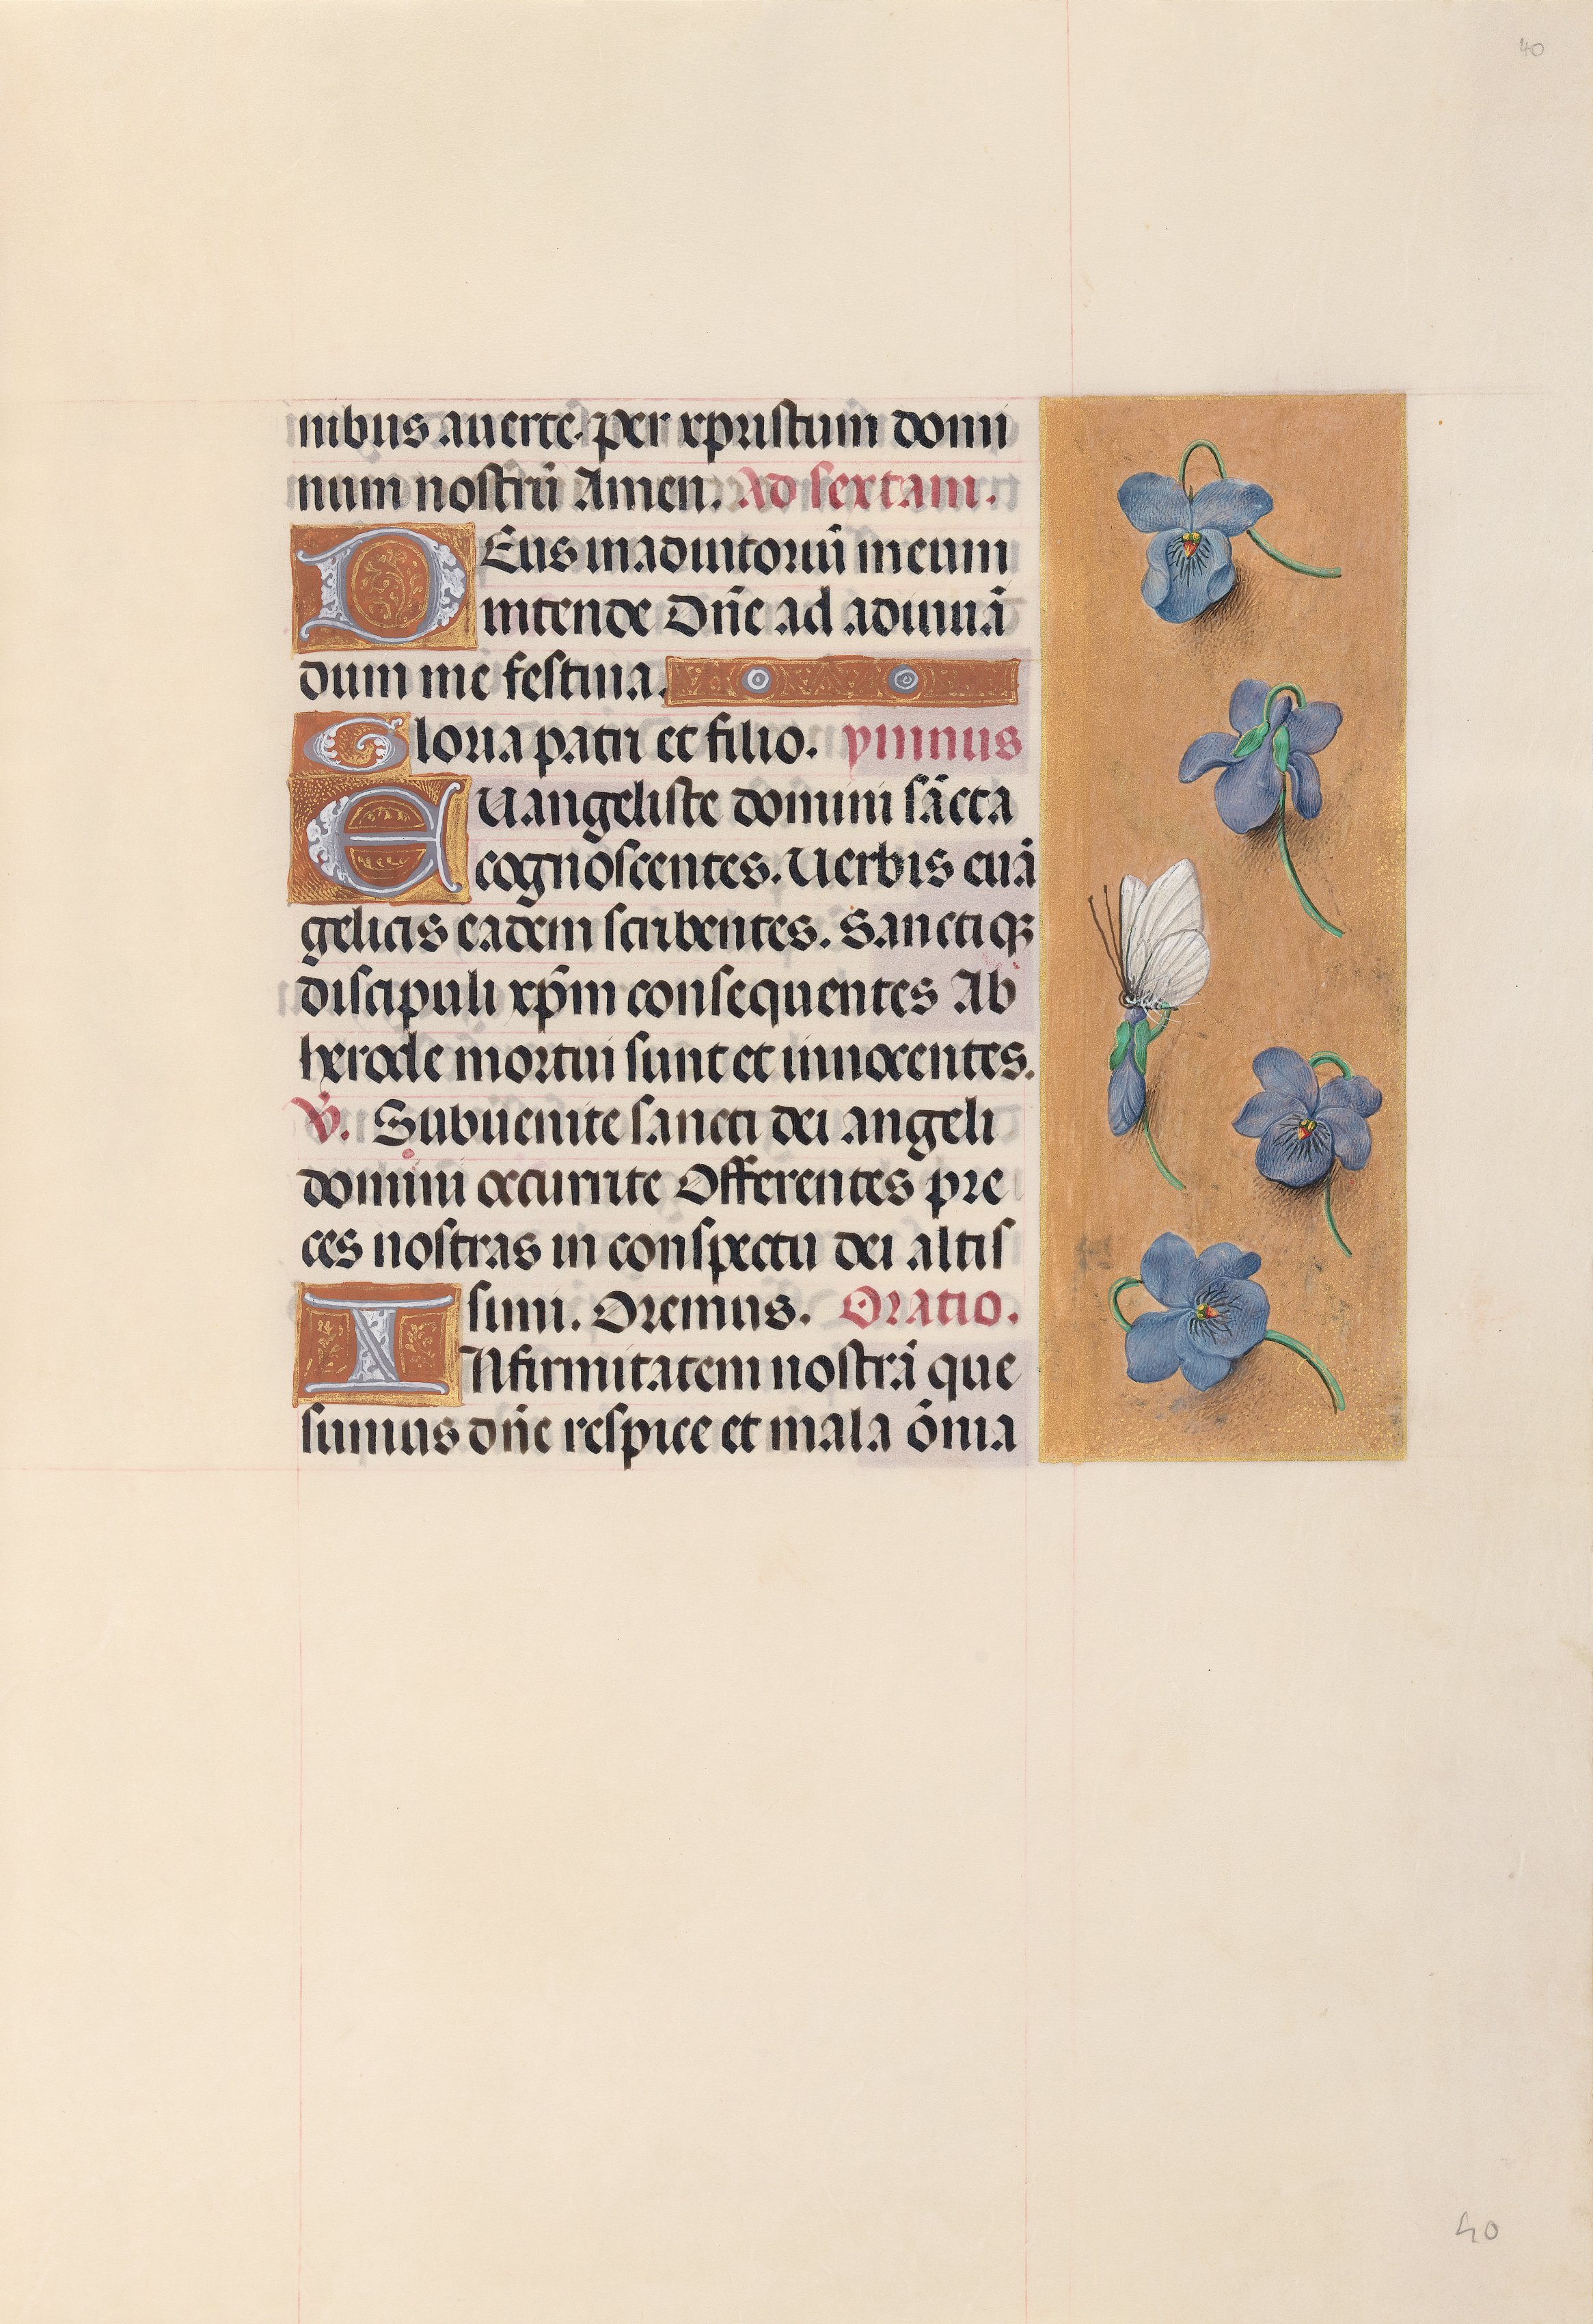 Hours of Queen Isabella the Catholic, Queen of Spain:  Fol. 40r